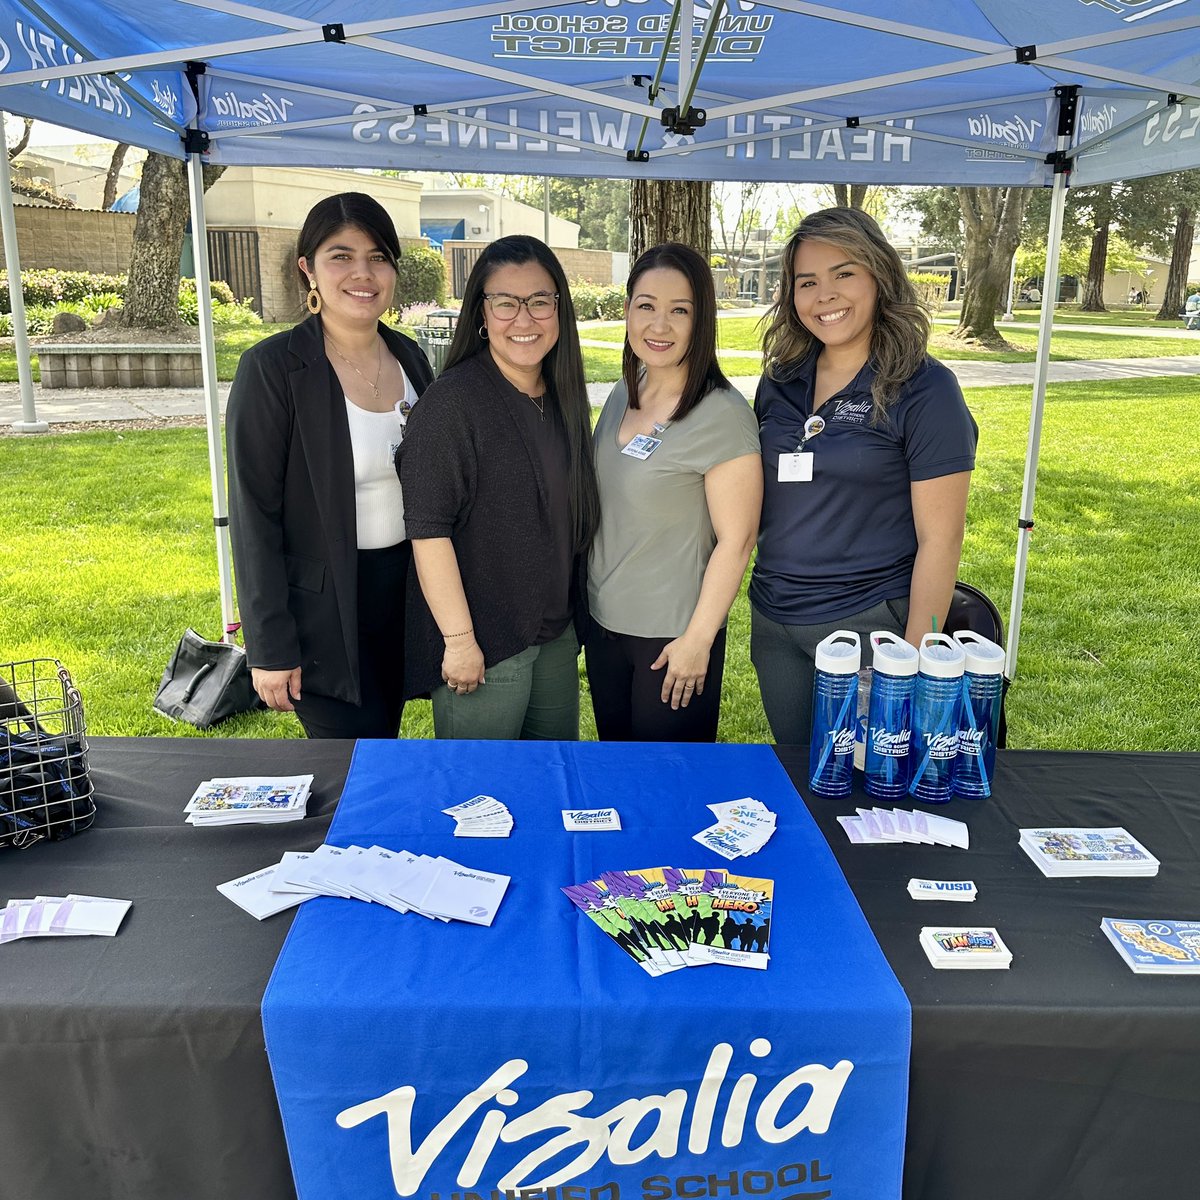 Excited to be at the @COSGiant Careers in Education Expo with our recruitment team, seeking passionate individuals to help shape the future of our community. Join our team! vusd.org/careers #IamVUSD